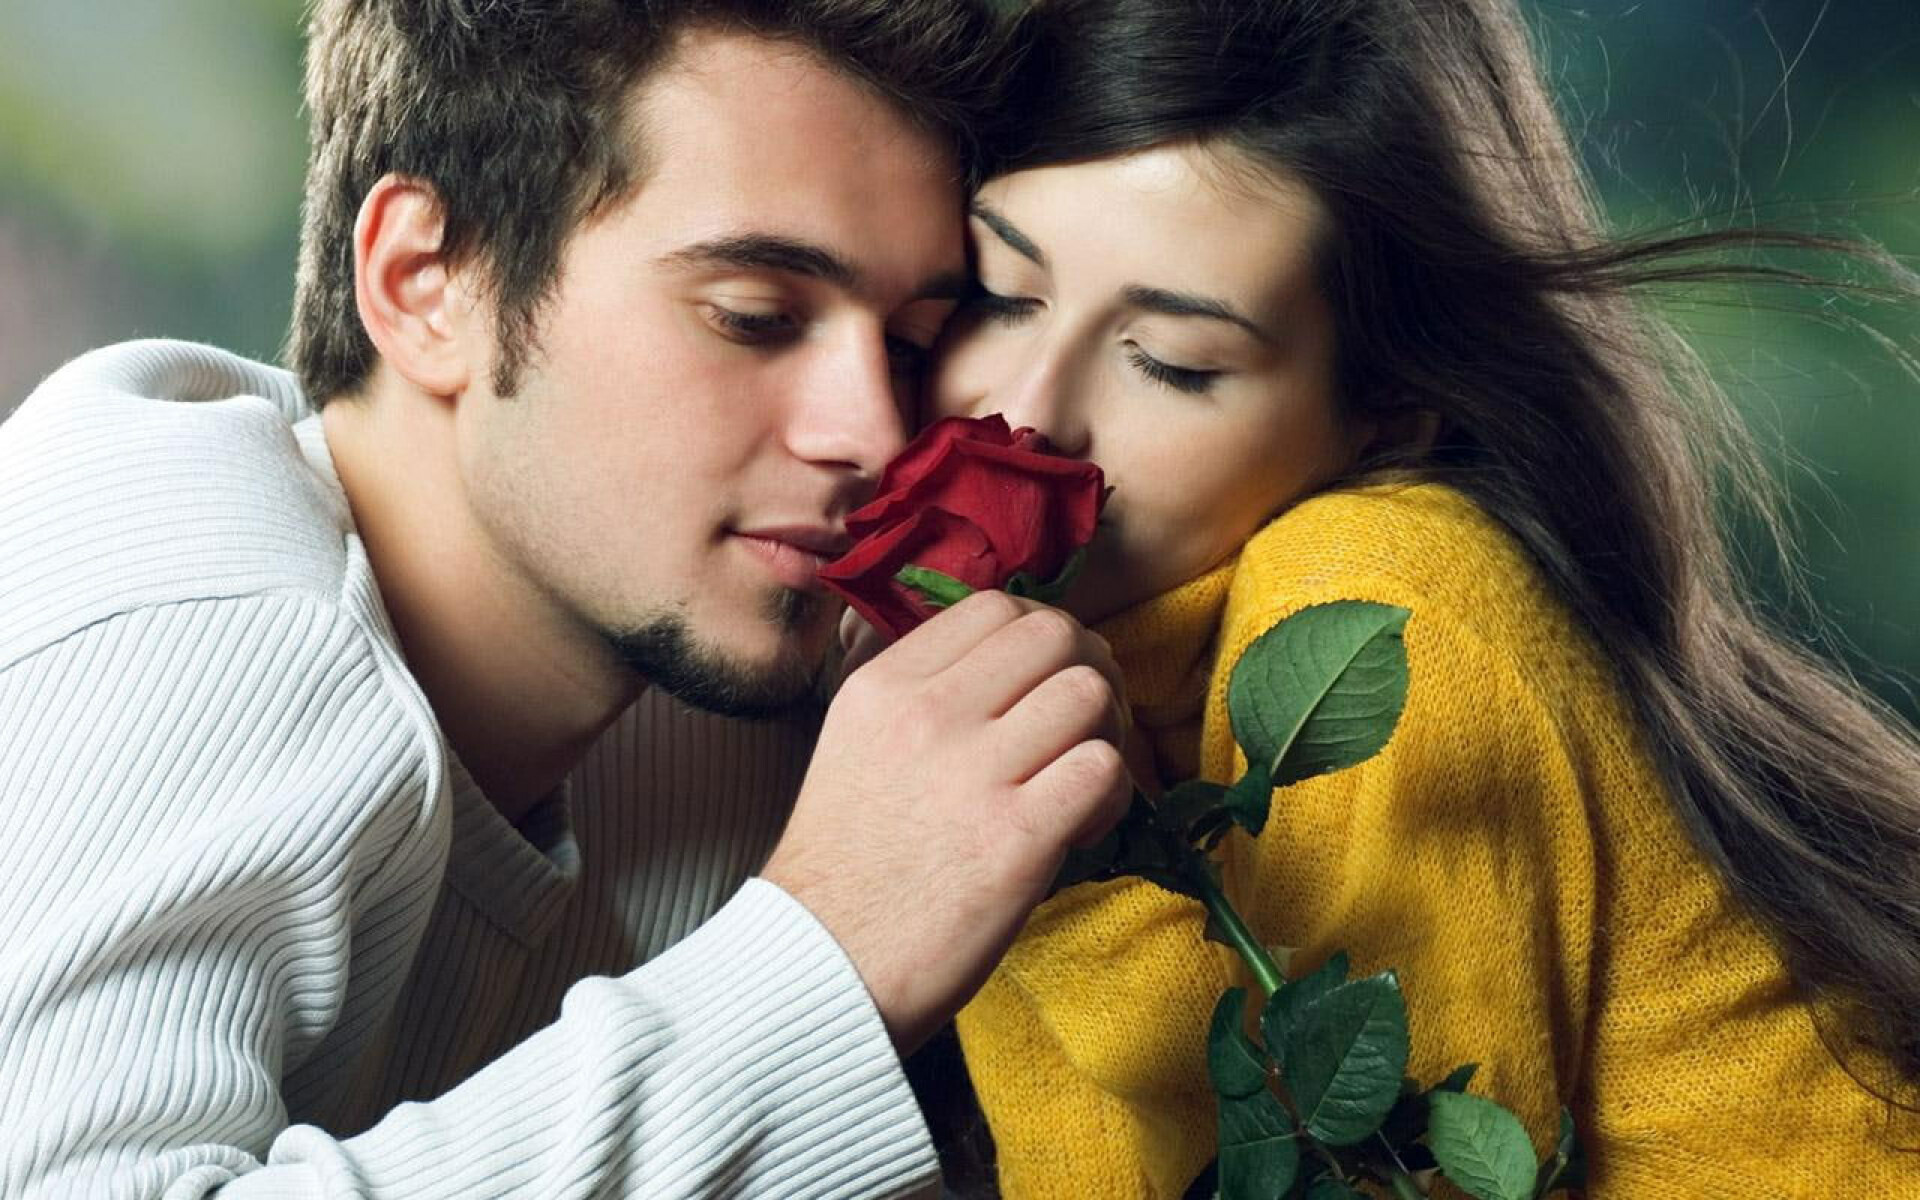 Romantic rose hug, Sweater-clad couple, Tender affection, Love in the air, 1920x1200 HD Desktop